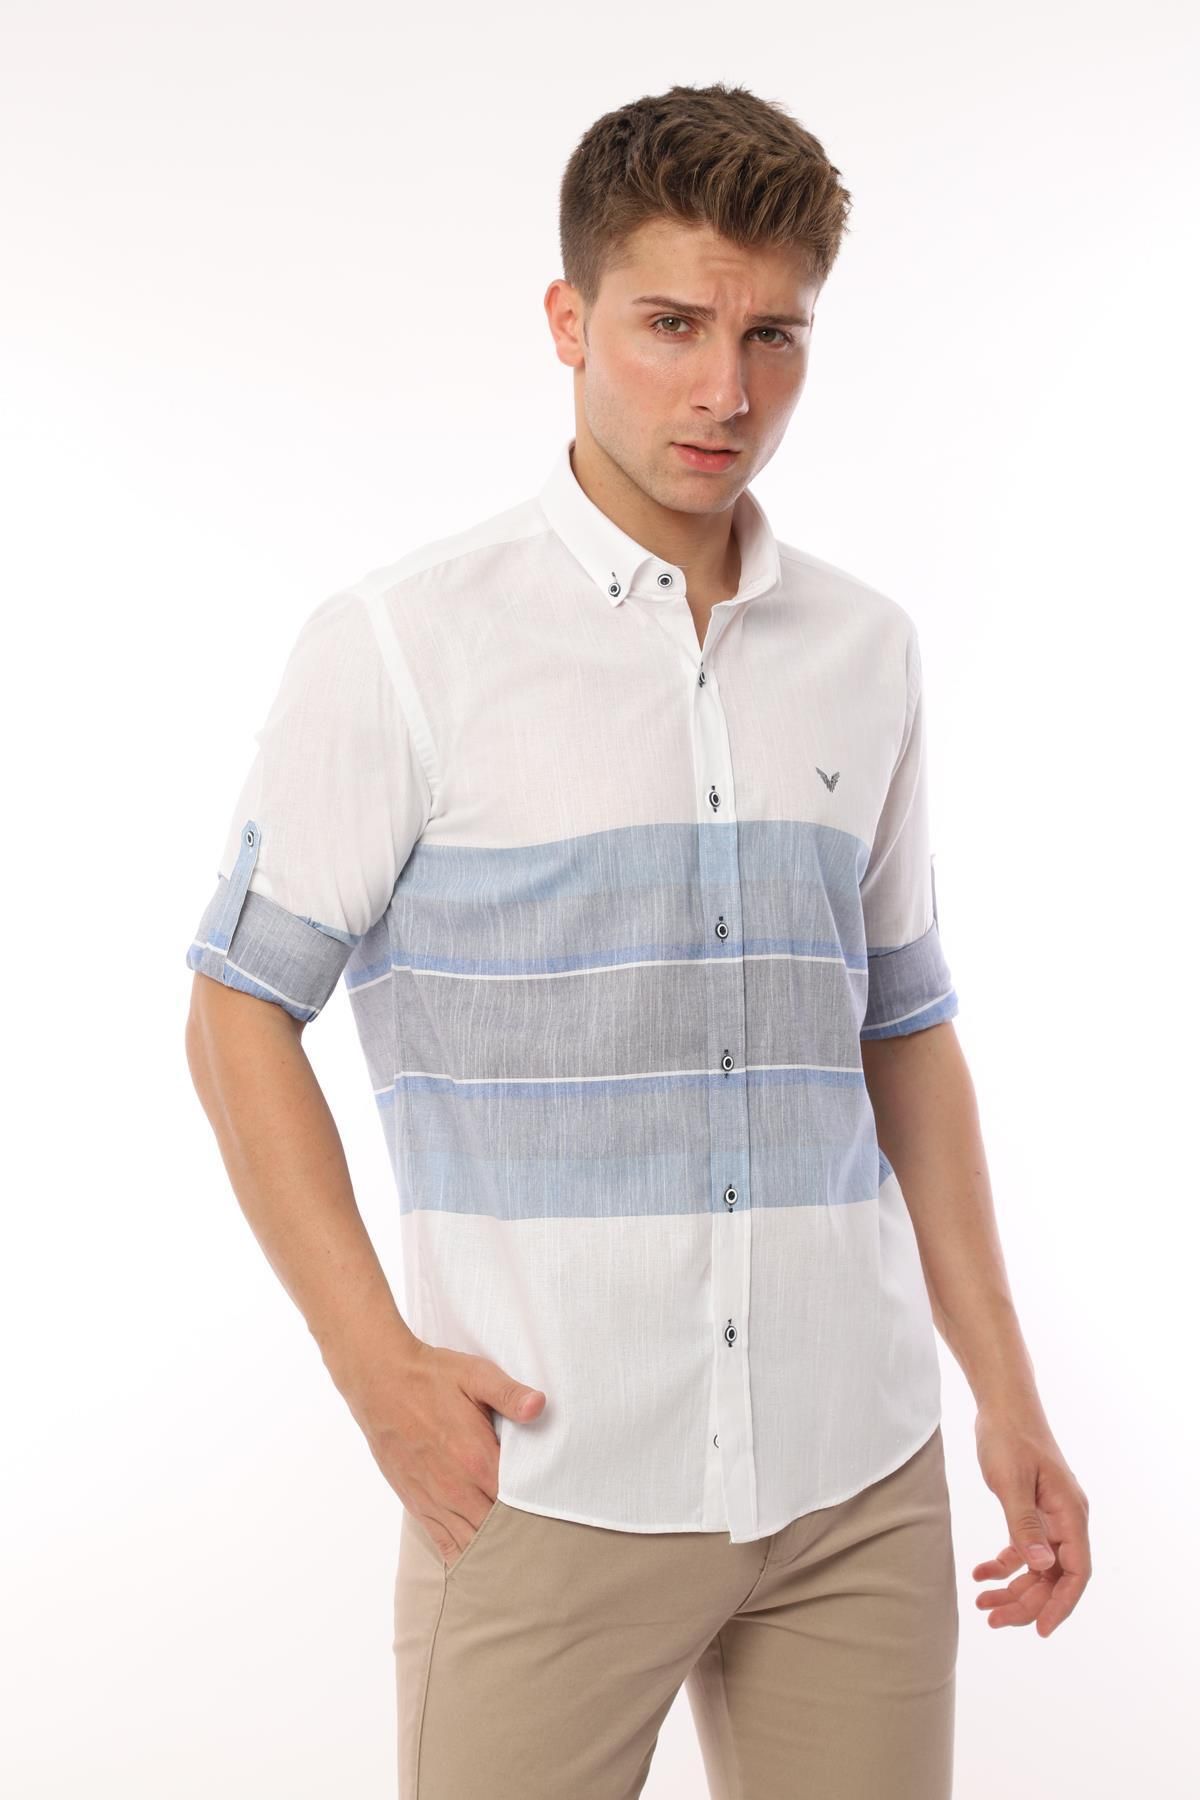 Buy Box fit short sleeved linen shirt - Light feather gray - from